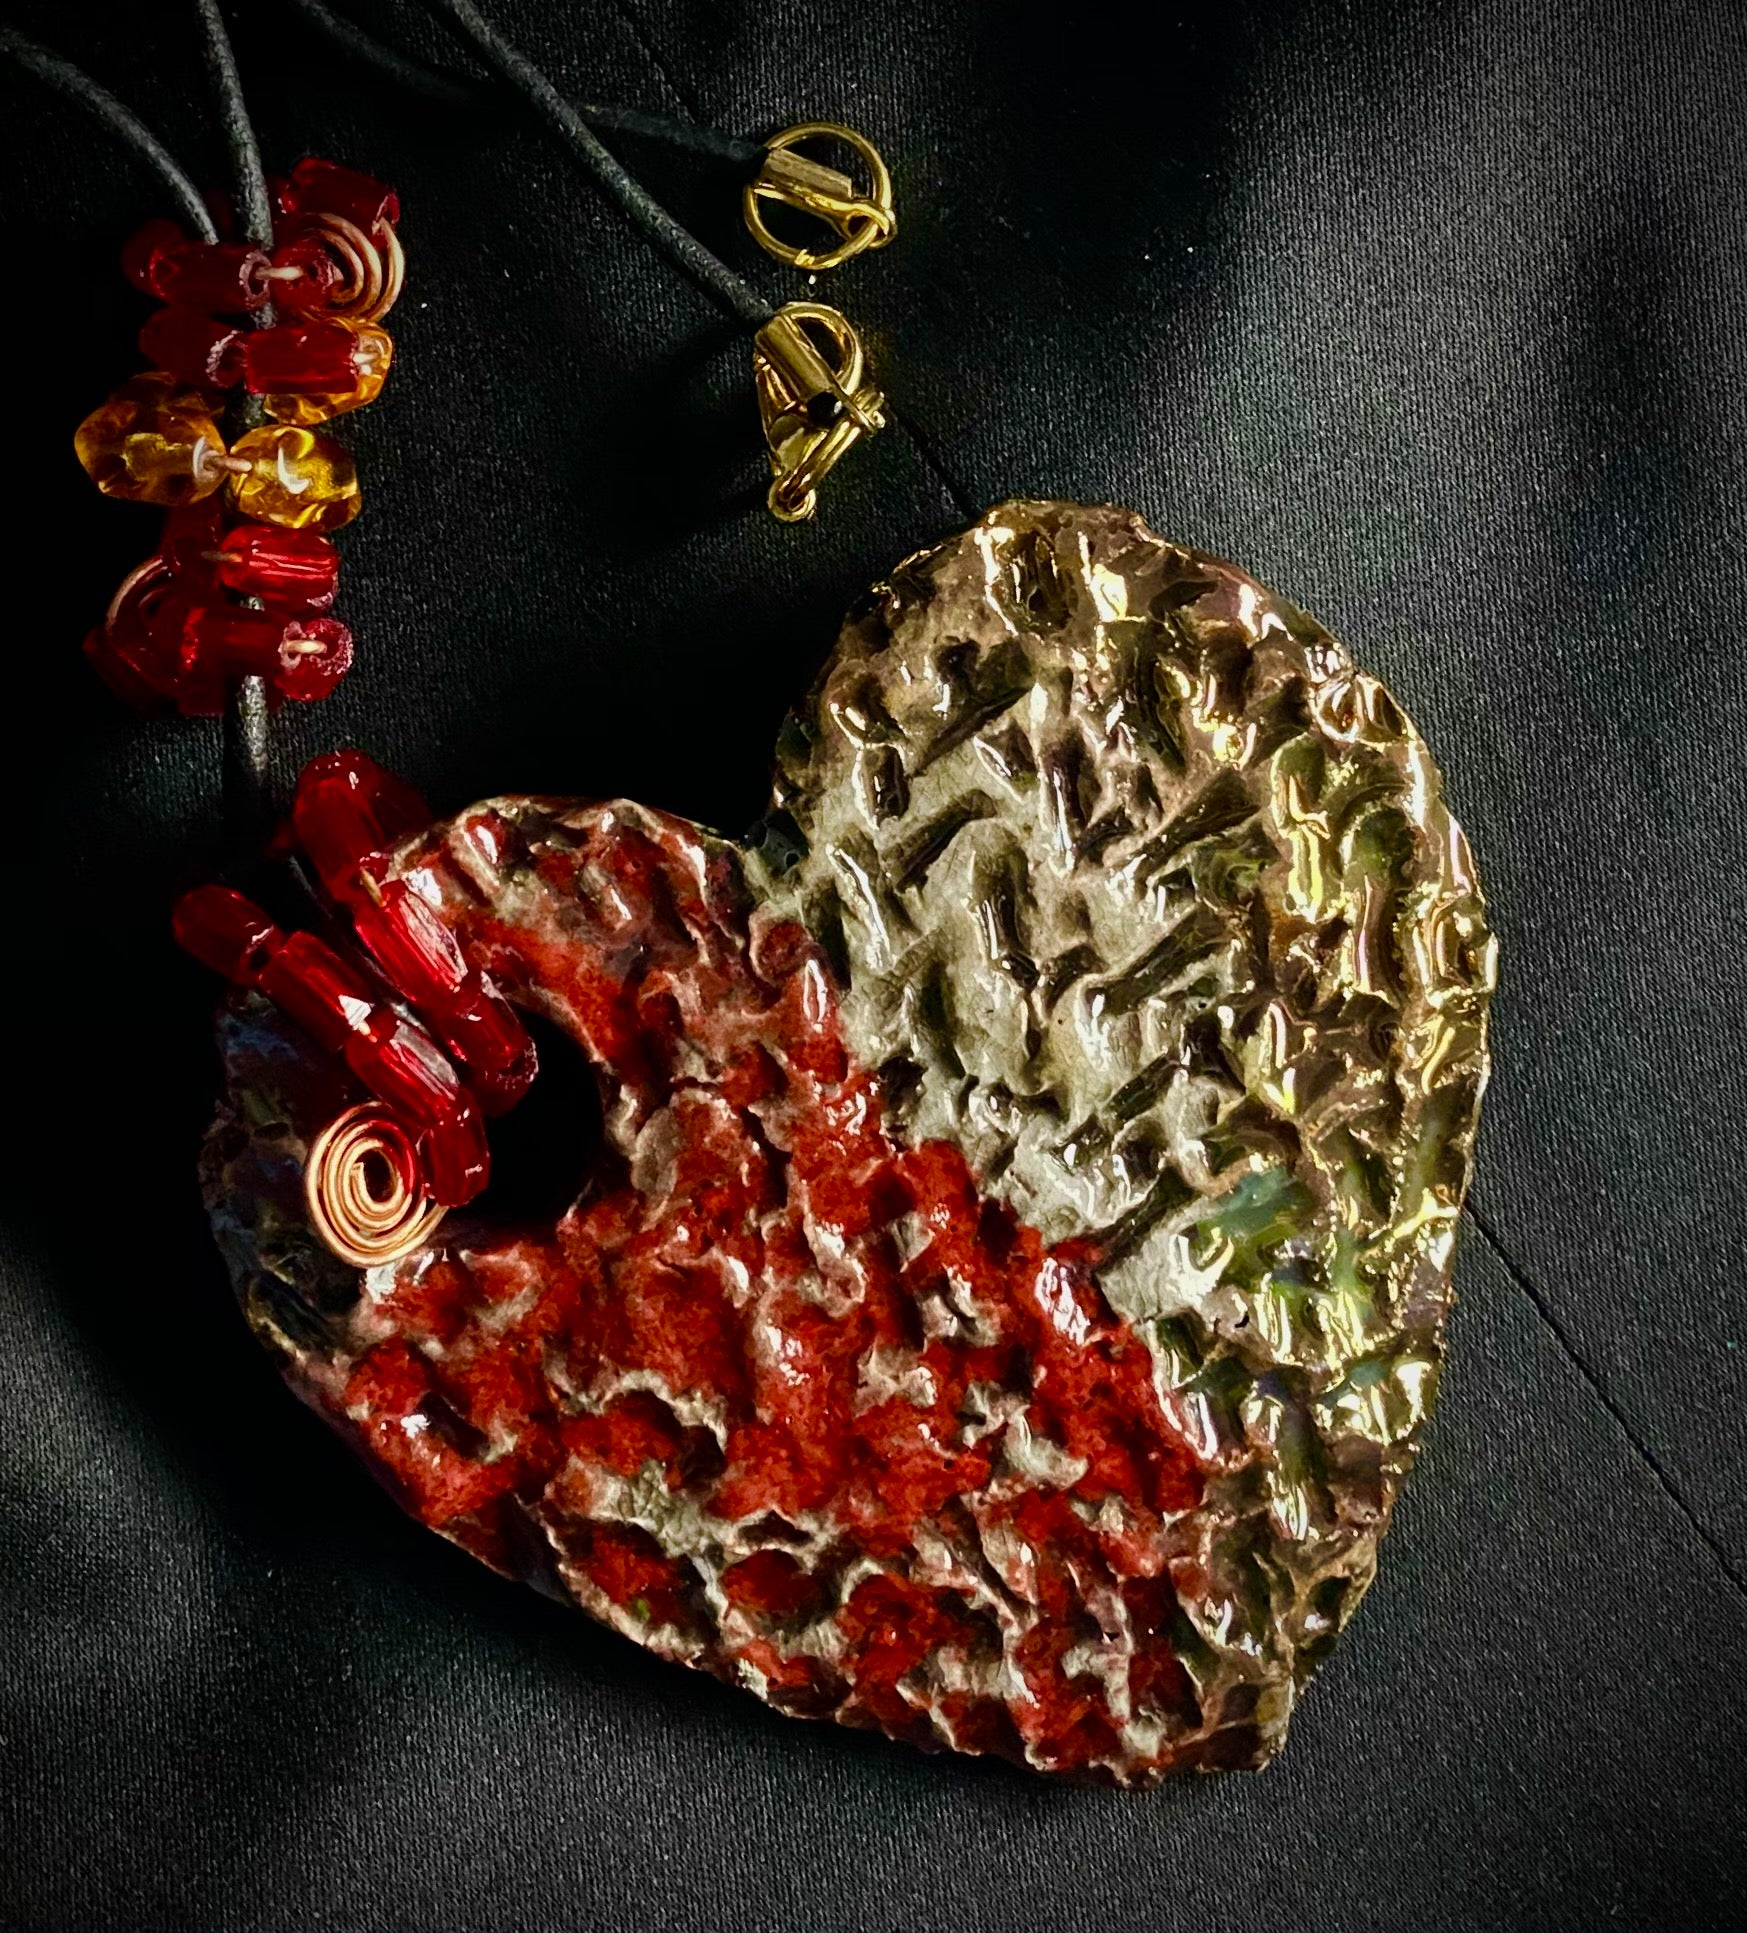 Have A Heart ! Each heart pendant is handmade with love! It is 3"x 3" and weighs approx. 3ozs. This pendant has a  ruby red and off white metallic raku glazes that renders a unique translucent  patina. The heart  has a textured  pattern. It holds a spiral of ruby red mini beads on a spiral copper wire. This pendant has a nice 12" black suede cord!